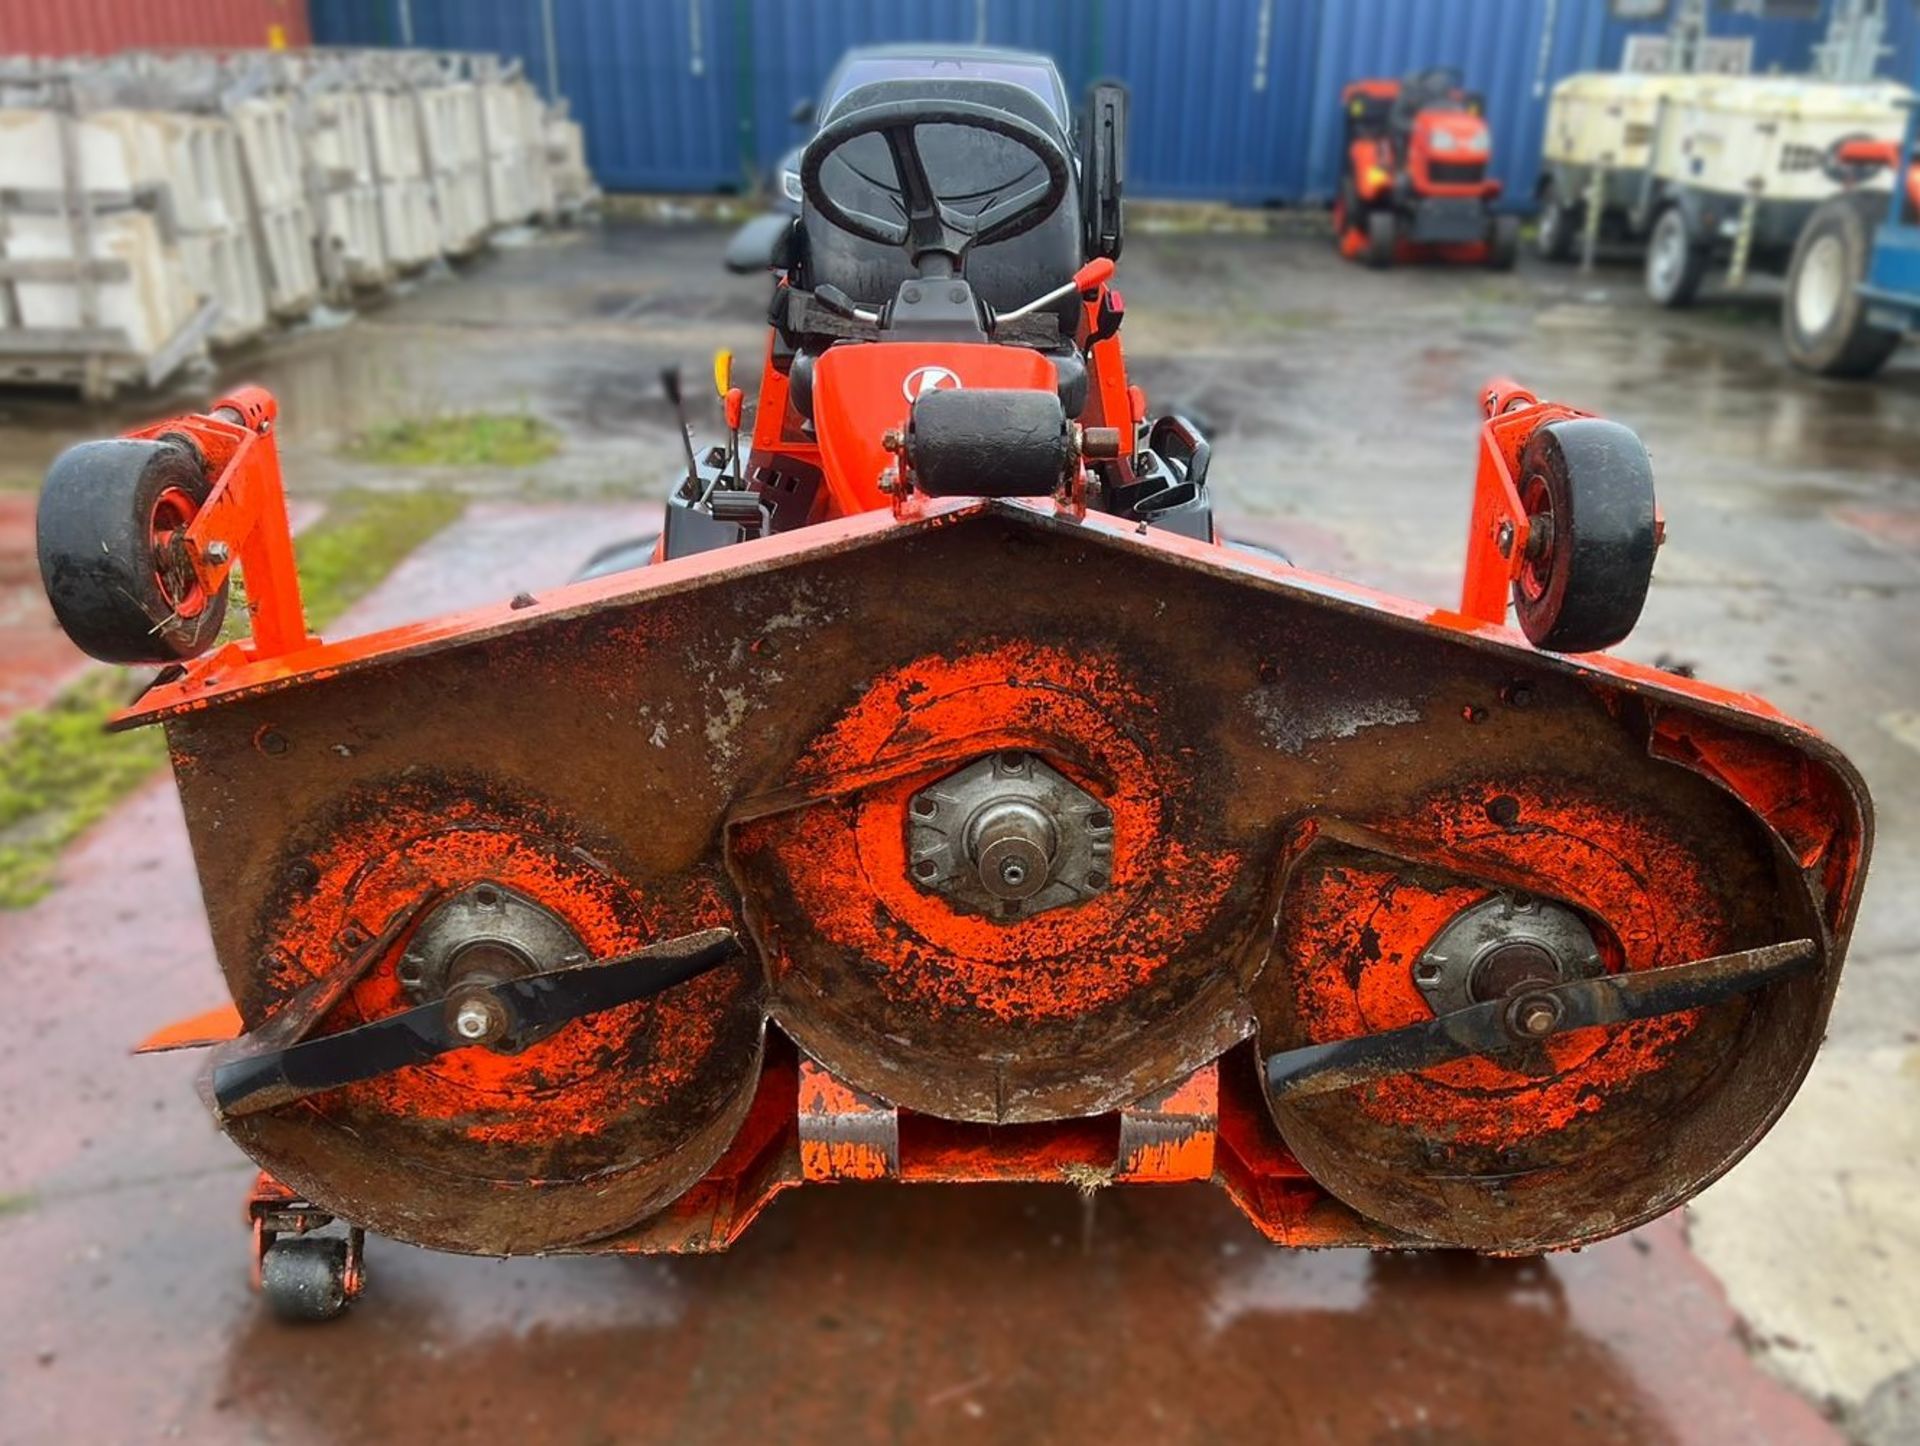 A Kubota F3680-EC 4WD Ride On Mower with 3 blade Mower Deck (one blade missing) and towing hitch, - Image 7 of 13